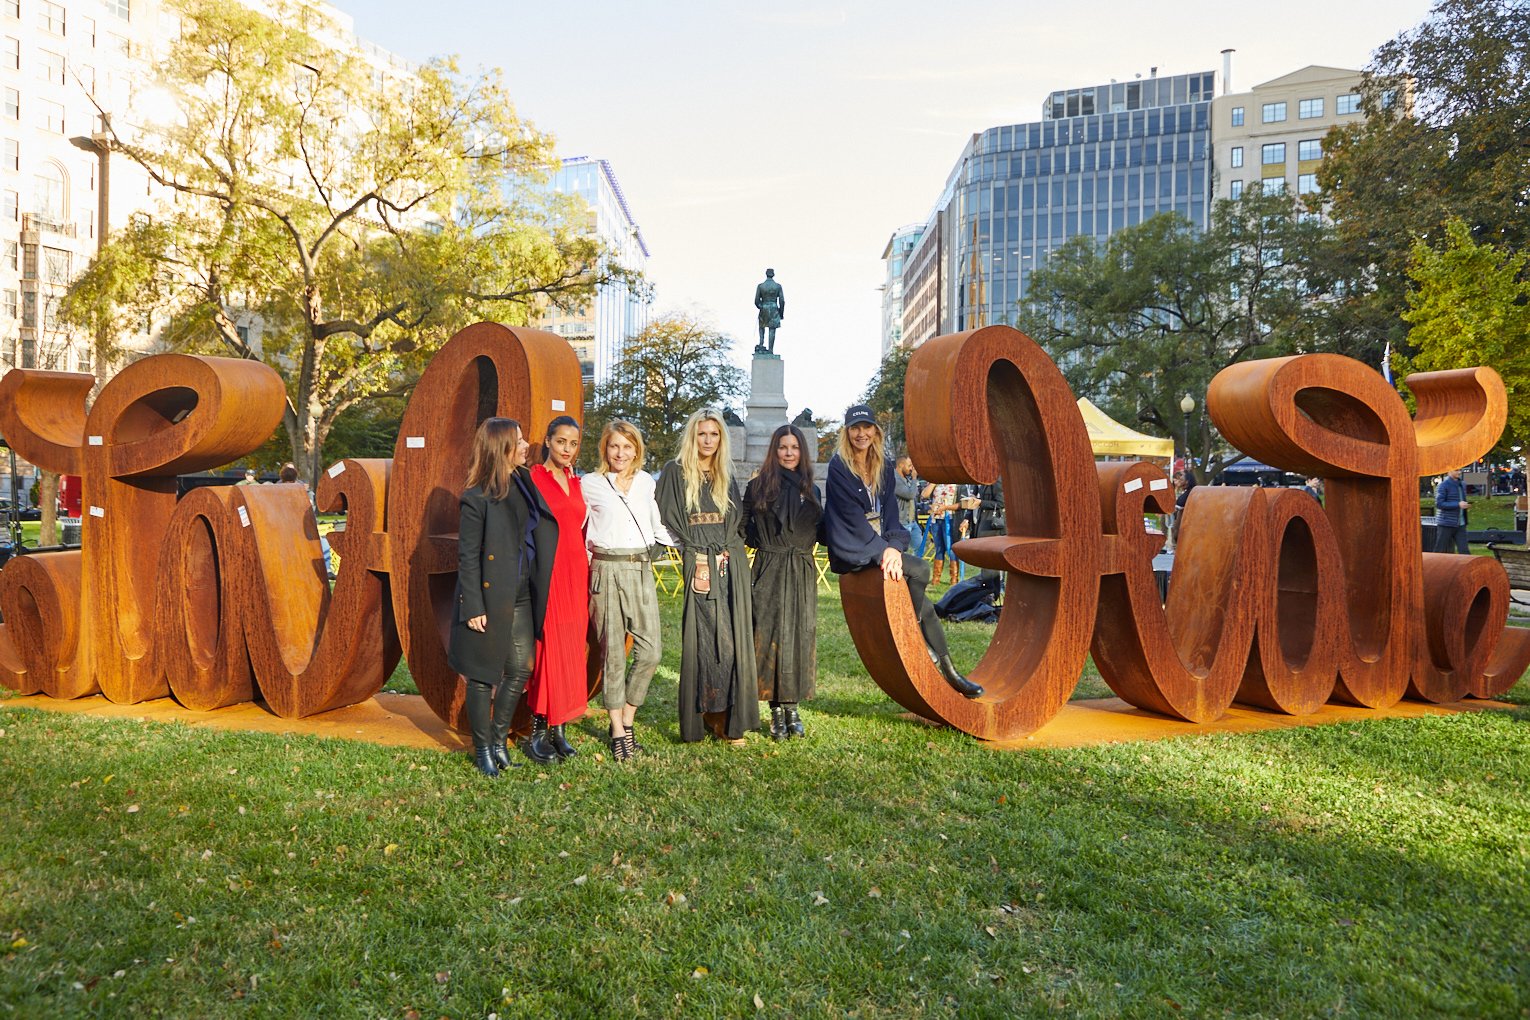 Annette Kröber-Riel, Sawsan Chebli, Kimberly Marteau Emerson, Mia Florentine Weiss, Karen Roth, and Sue Giers in Farragut Square, DC